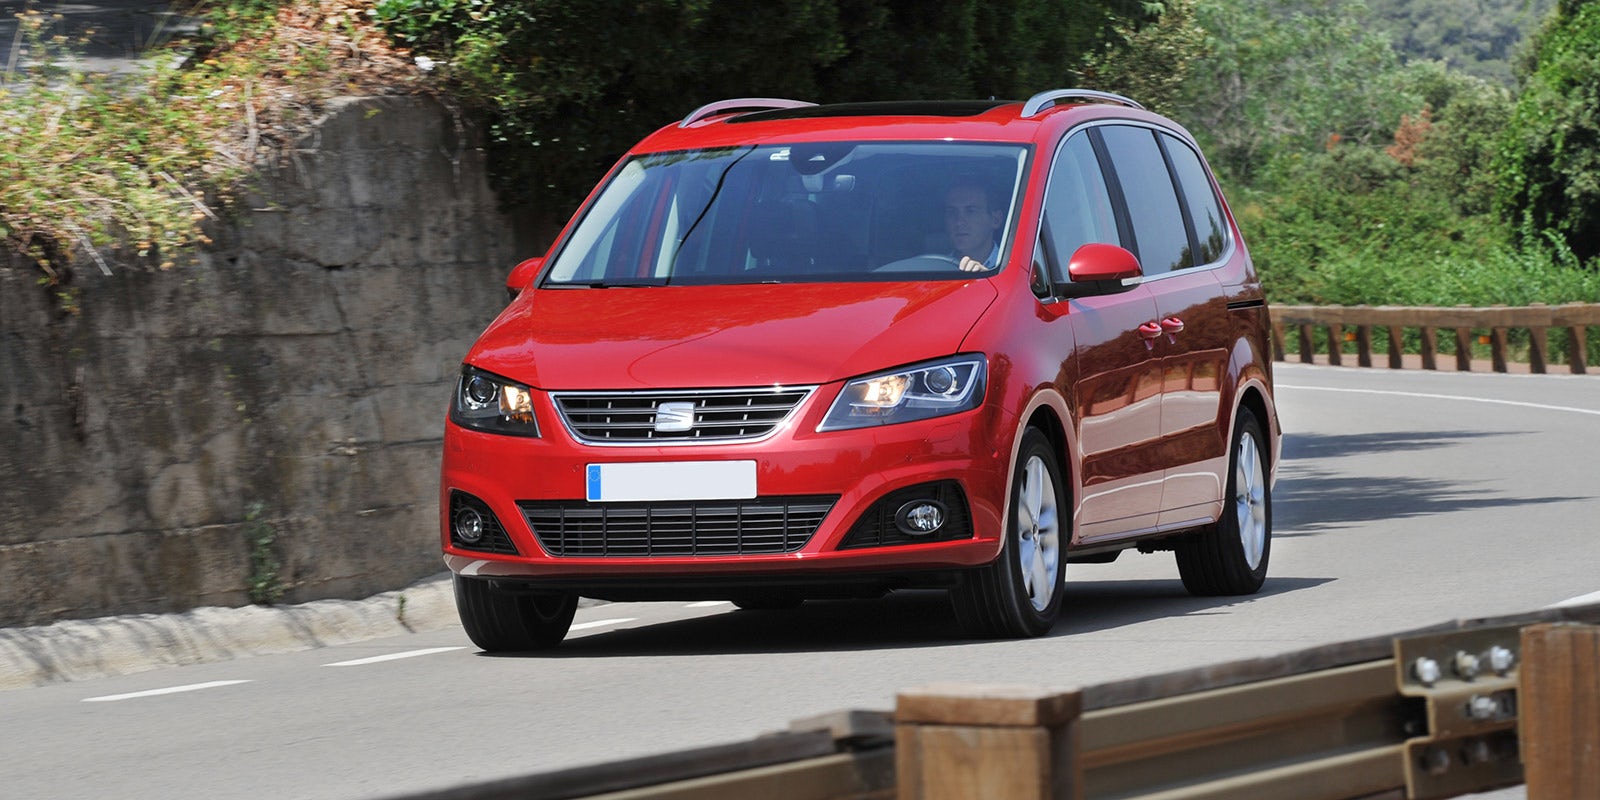 SEAT Alhambra sizes and dimensions guide